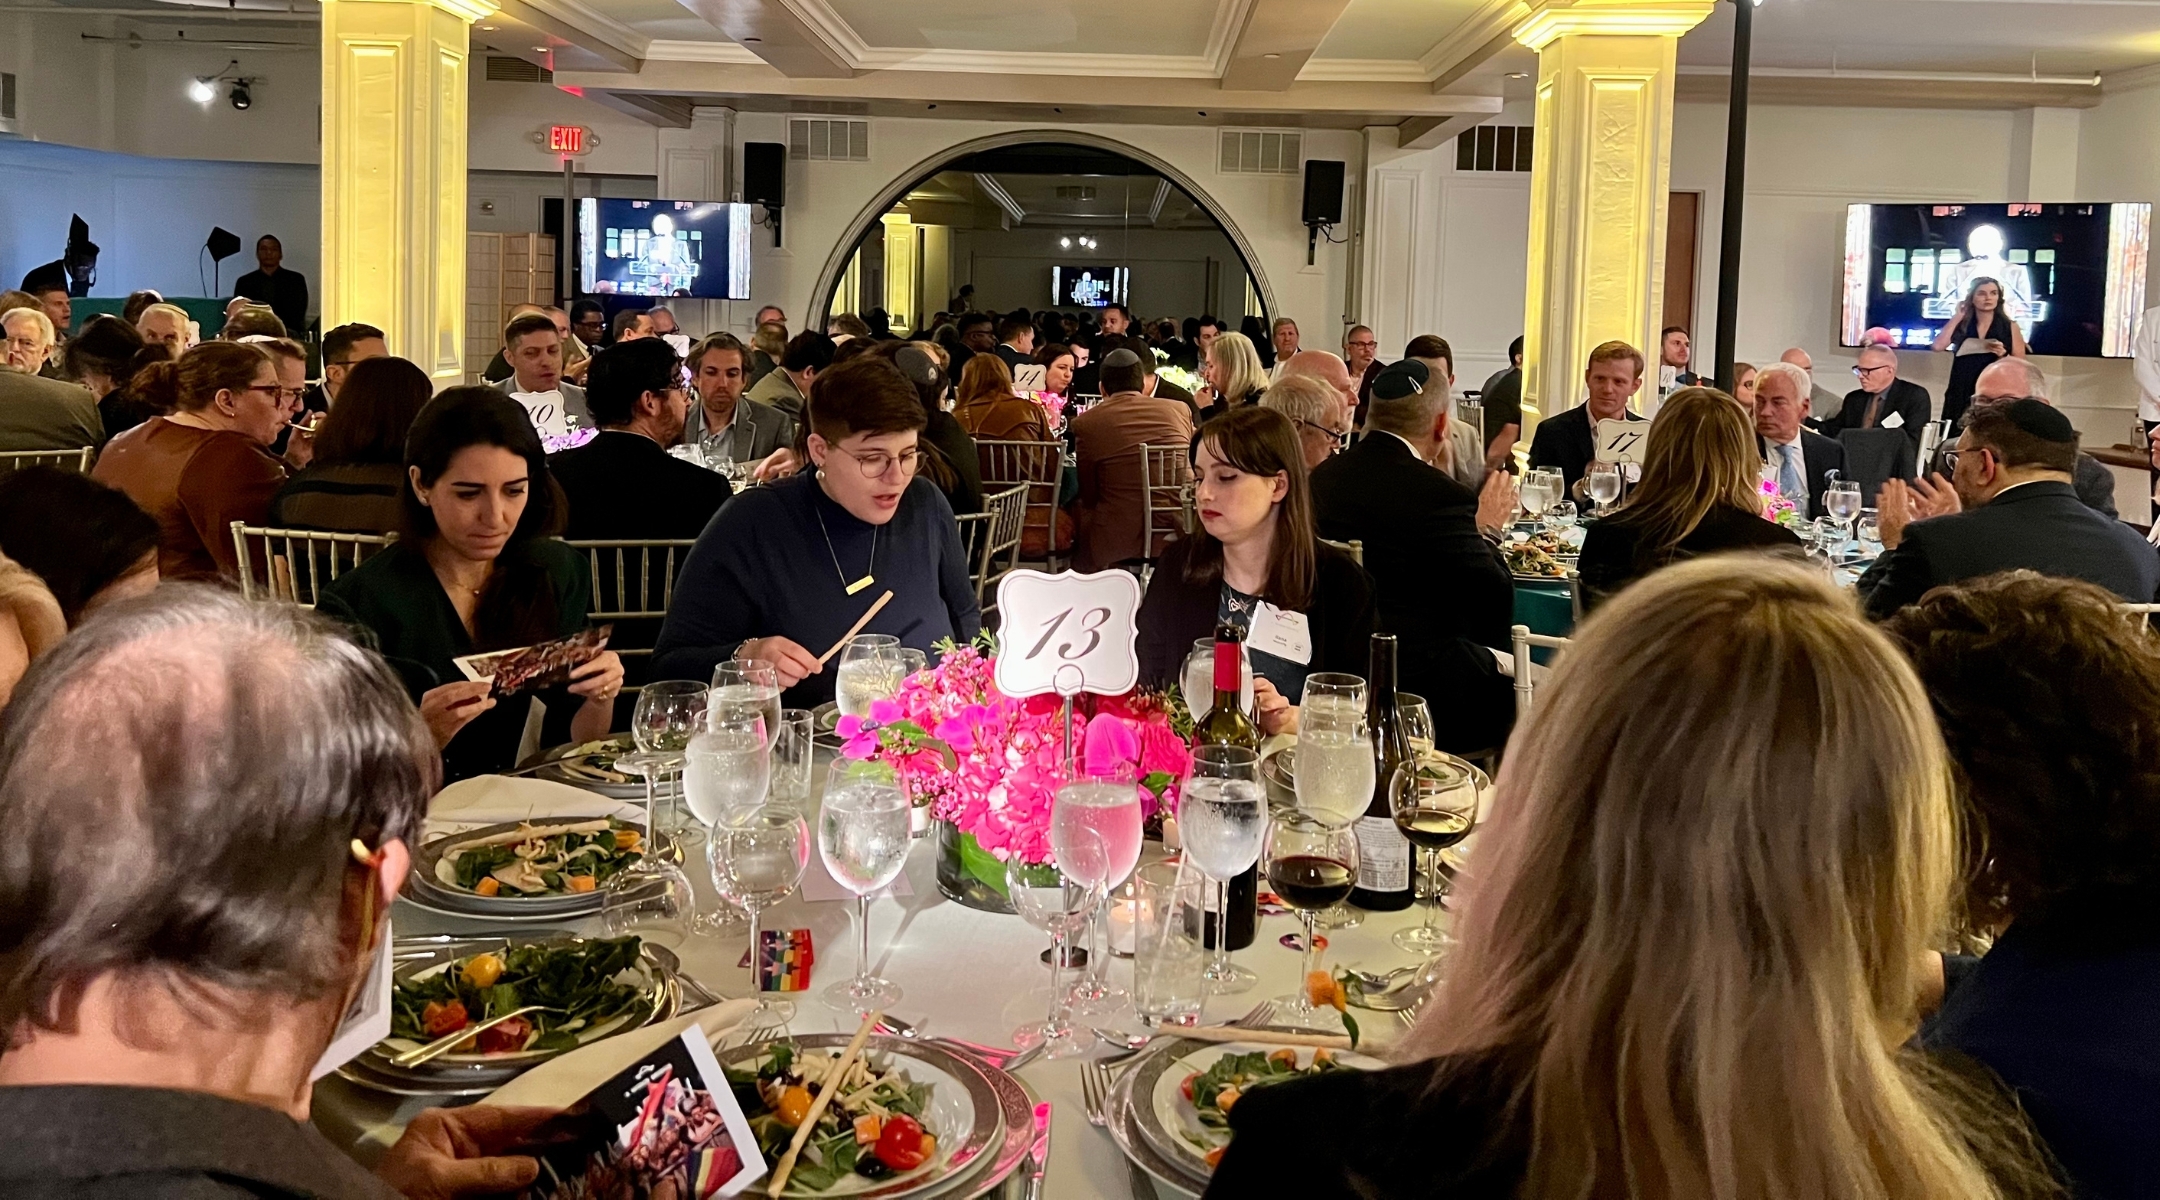 Approximately 200 guests attended the gala Monday night, where executive director Ethan Felson announced a new emergency campaign for LGBTQ causes in Israel. (Jackie Hajdenberg)